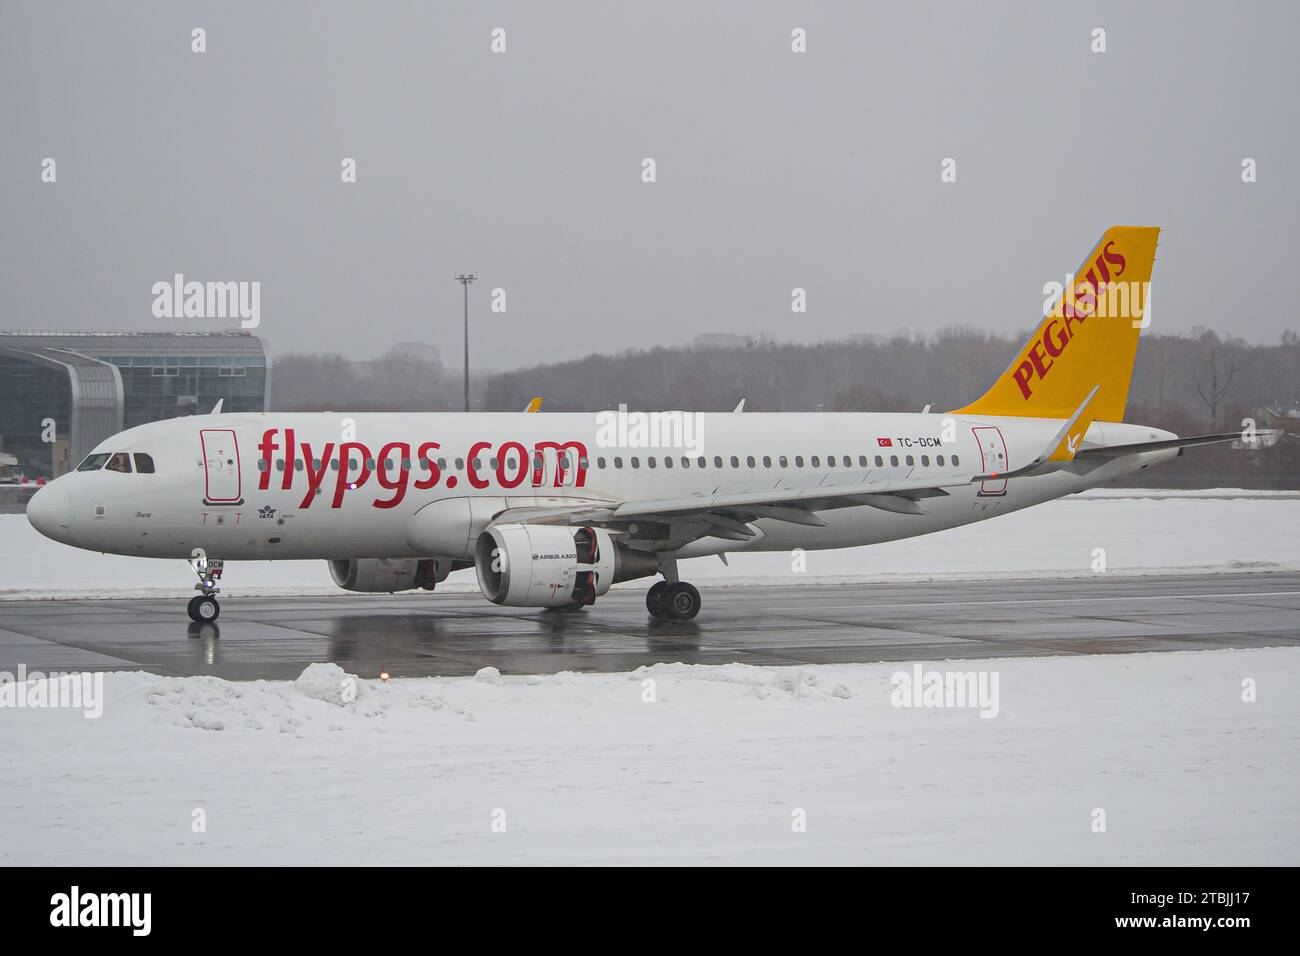 Pegasus Airlines Airbus A320 slowing down after a landing at Lviv Airport after a flight from Istanbul, Turkey Stock Photo